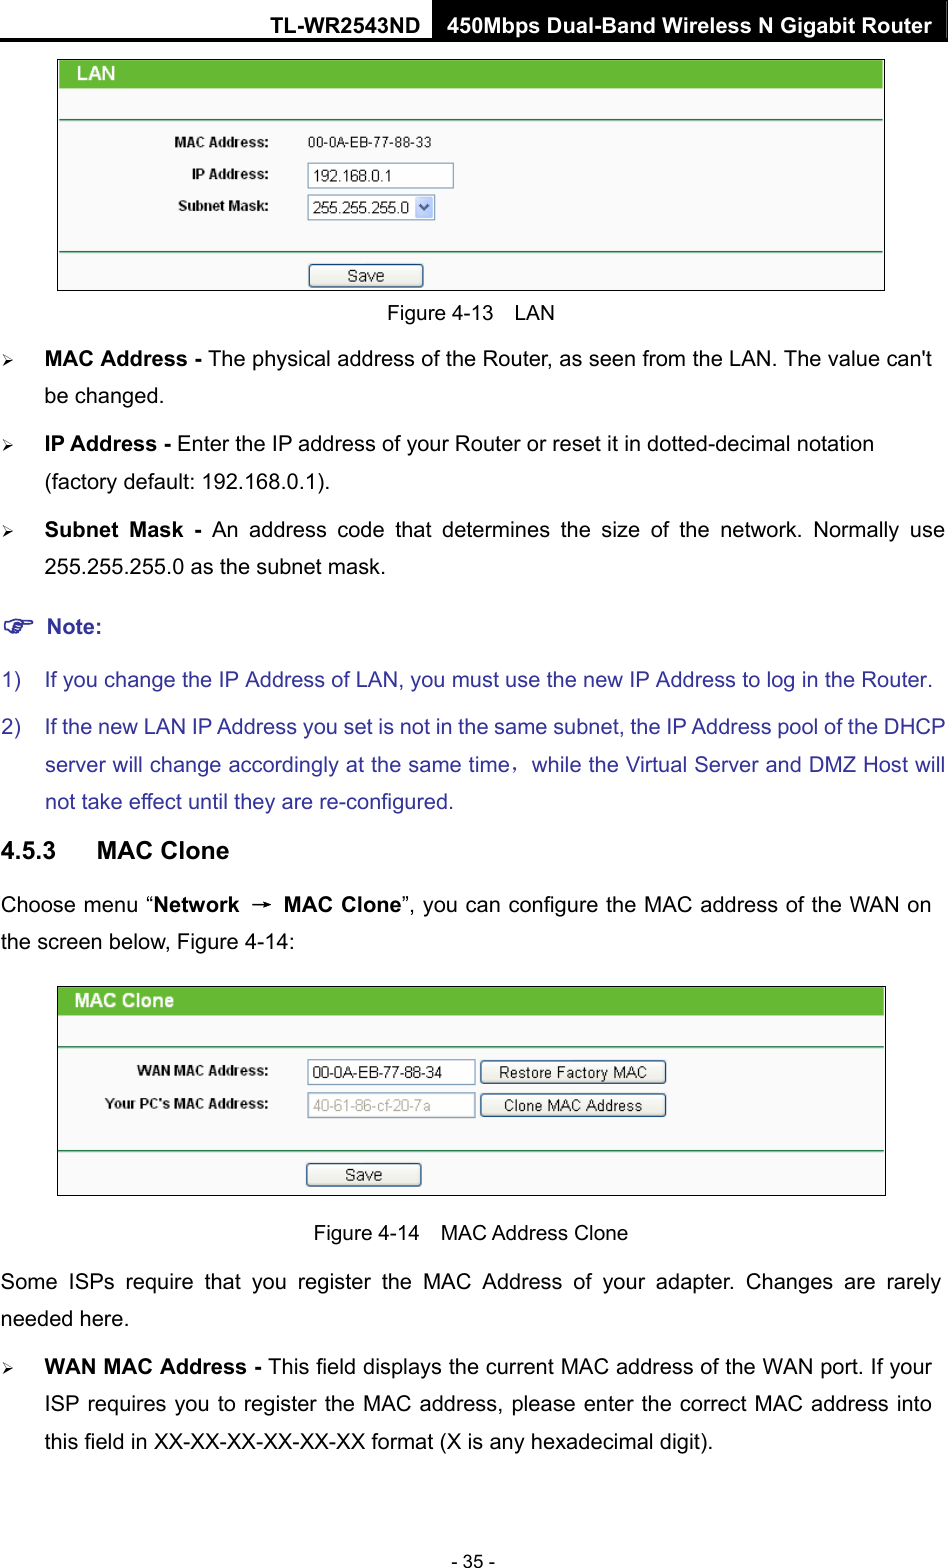 TL-WR2543ND 450Mbps Dual-Band Wireless N Gigabit Router - 35 -  Figure 4-13  LAN ¾ MAC Address - The physical address of the Router, as seen from the LAN. The value can&apos;t be changed. ¾ IP Address - Enter the IP address of your Router or reset it in dotted-decimal notation (factory default: 192.168.0.1). ¾ Subnet Mask - An address code that determines the size of the network. Normally use 255.255.255.0 as the subnet mask.   ) Note: 1)  If you change the IP Address of LAN, you must use the new IP Address to log in the Router.   2)  If the new LAN IP Address you set is not in the same subnet, the IP Address pool of the DHCP server will change accordingly at the same time，while the Virtual Server and DMZ Host will not take effect until they are re-configured. 4.5.3  MAC Clone Choose menu “Network  → MAC Clone”, you can configure the MAC address of the WAN on the screen below, Figure 4-14:  Figure 4-14  MAC Address Clone Some ISPs require that you register the MAC Address of your adapter. Changes are rarely needed here. ¾ WAN MAC Address - This field displays the current MAC address of the WAN port. If your ISP requires you to register the MAC address, please enter the correct MAC address into this field in XX-XX-XX-XX-XX-XX format (X is any hexadecimal digit).   